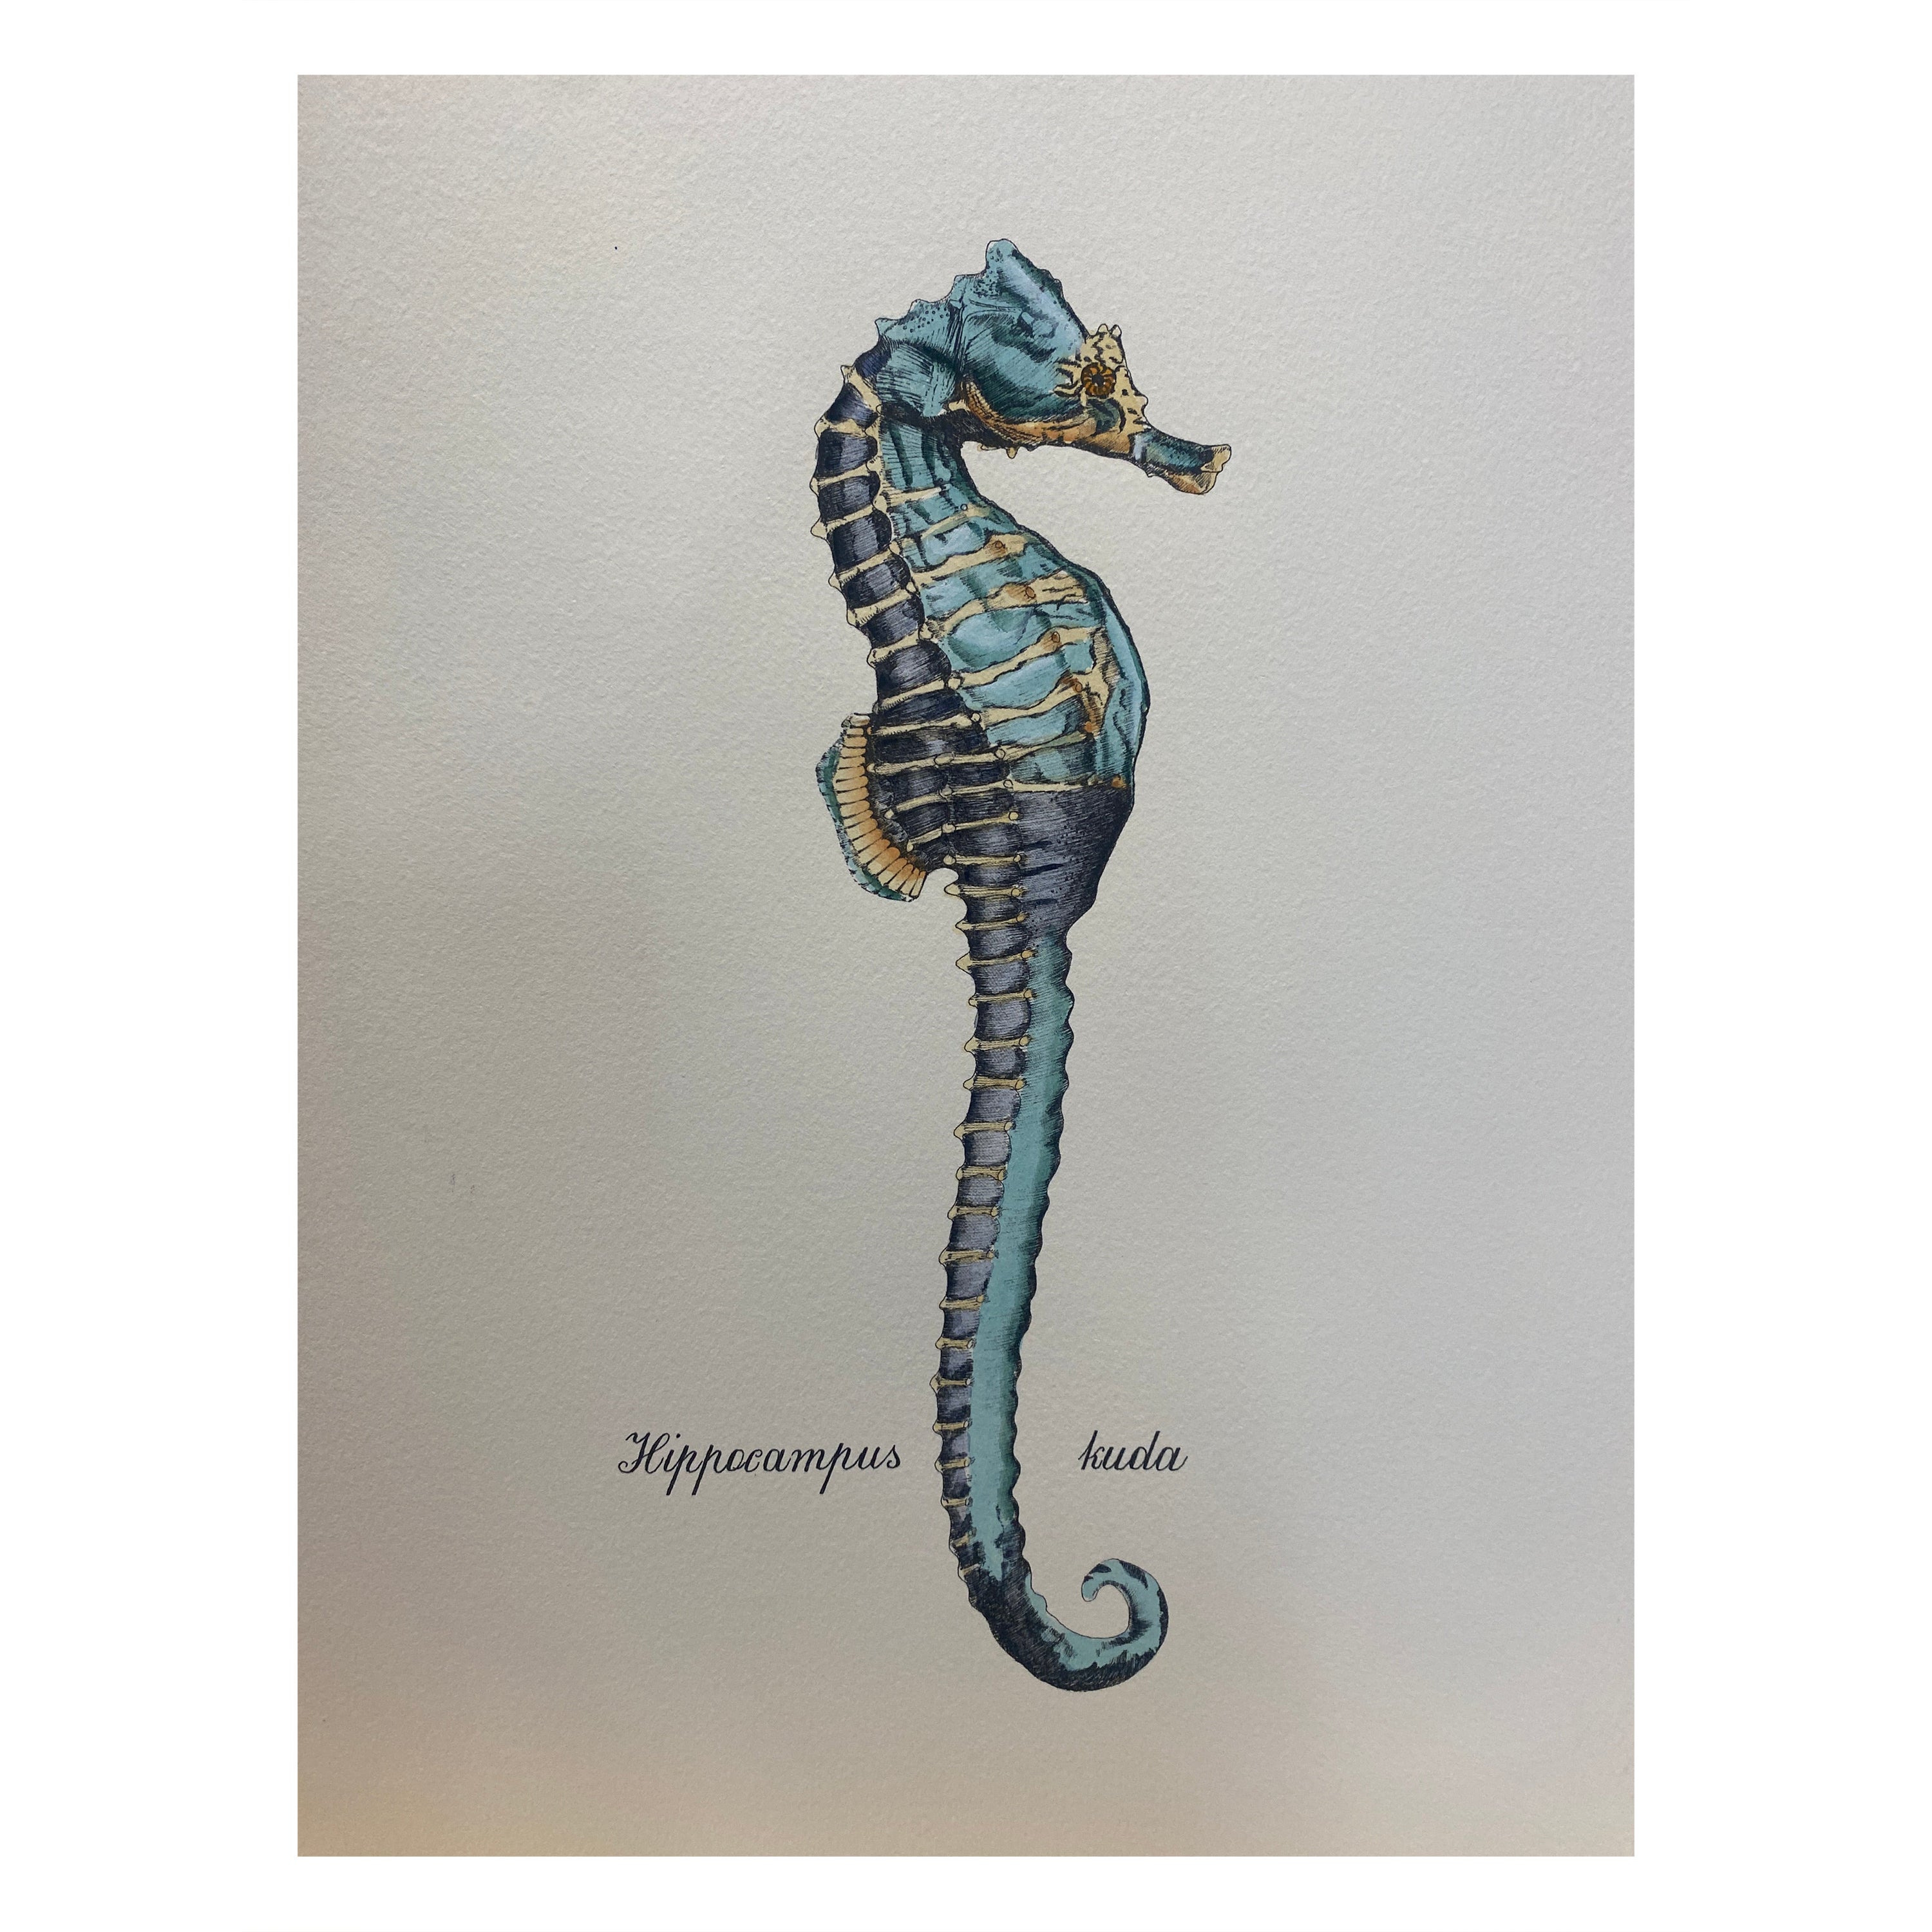 Italian Contemporary Hand Painted Print "Hippocampus Kuda", 2 of 2 For Sale